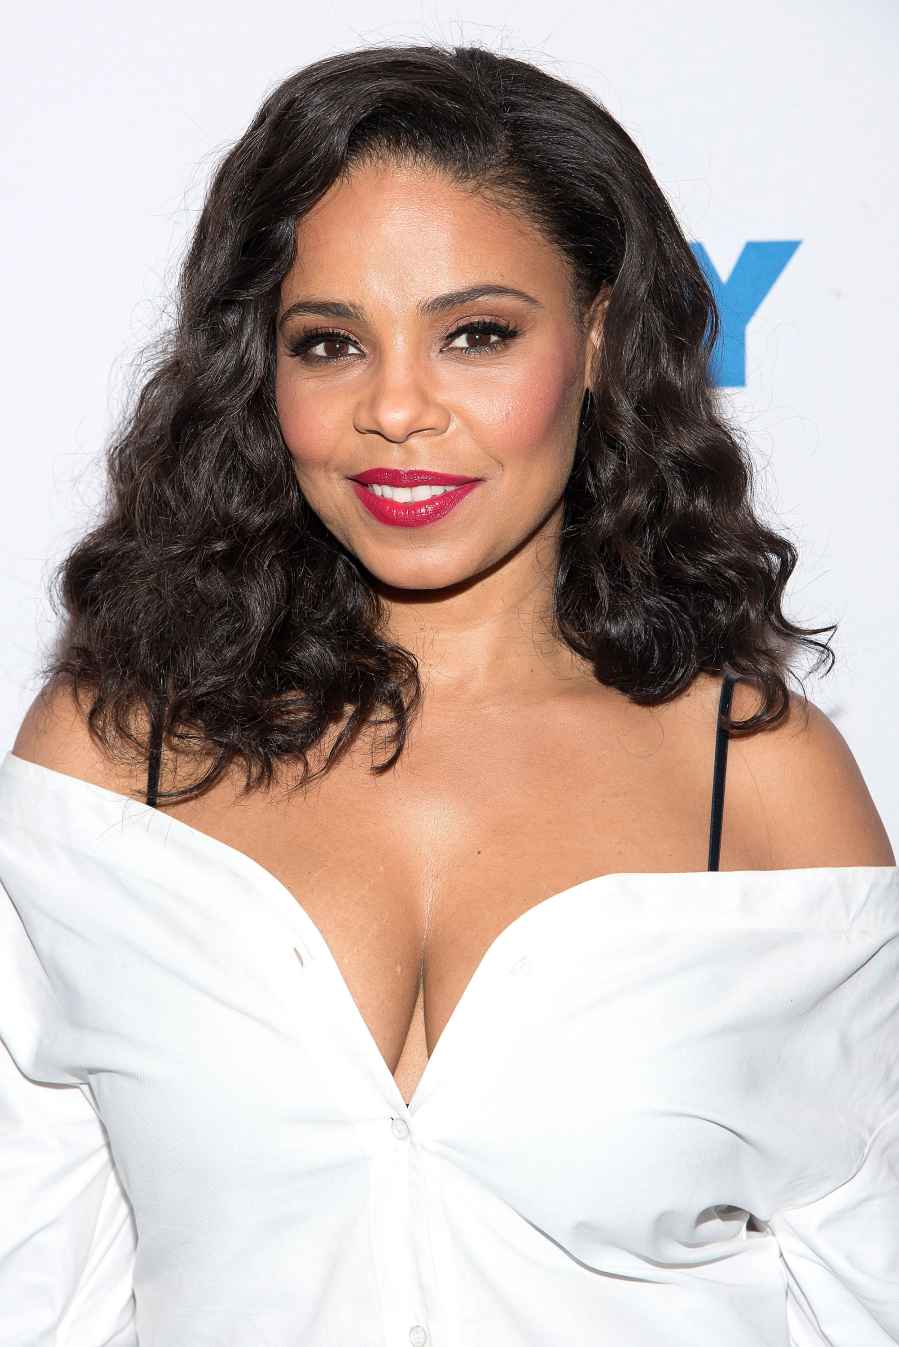 Every Celeb Appearing on the New ‘Twilight Zone’ Sanaa Lathan